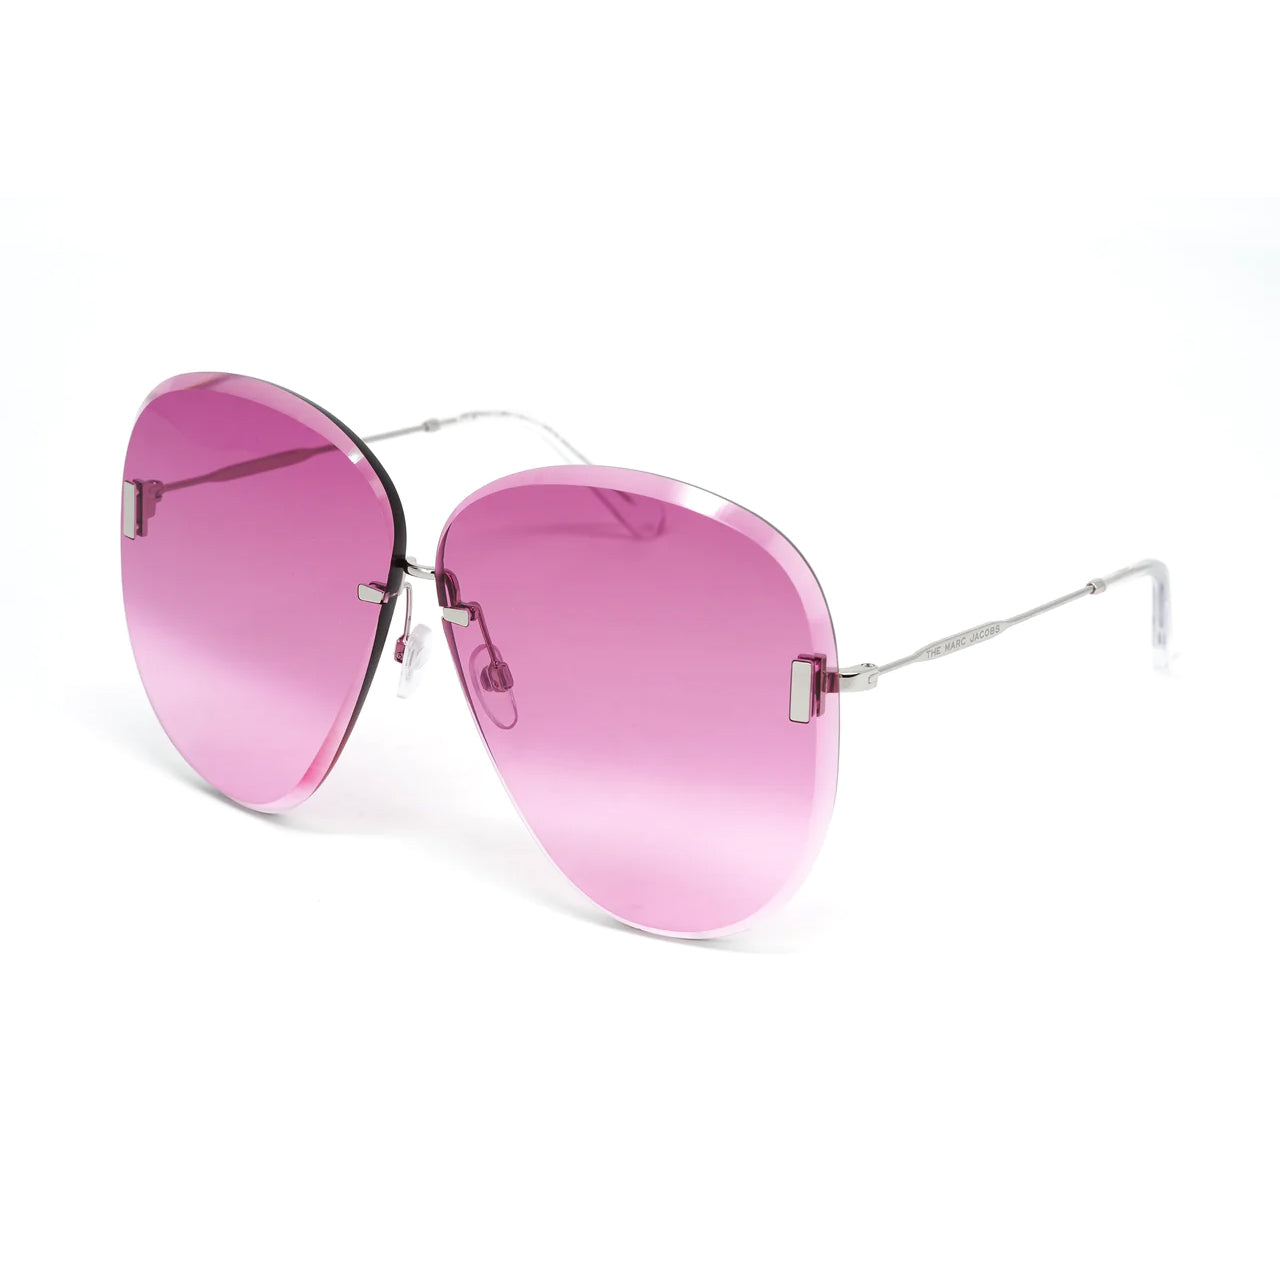 Marc Jacobs Women's Sunglasses Oversized Rimless Pink MARC 519/S 0109R